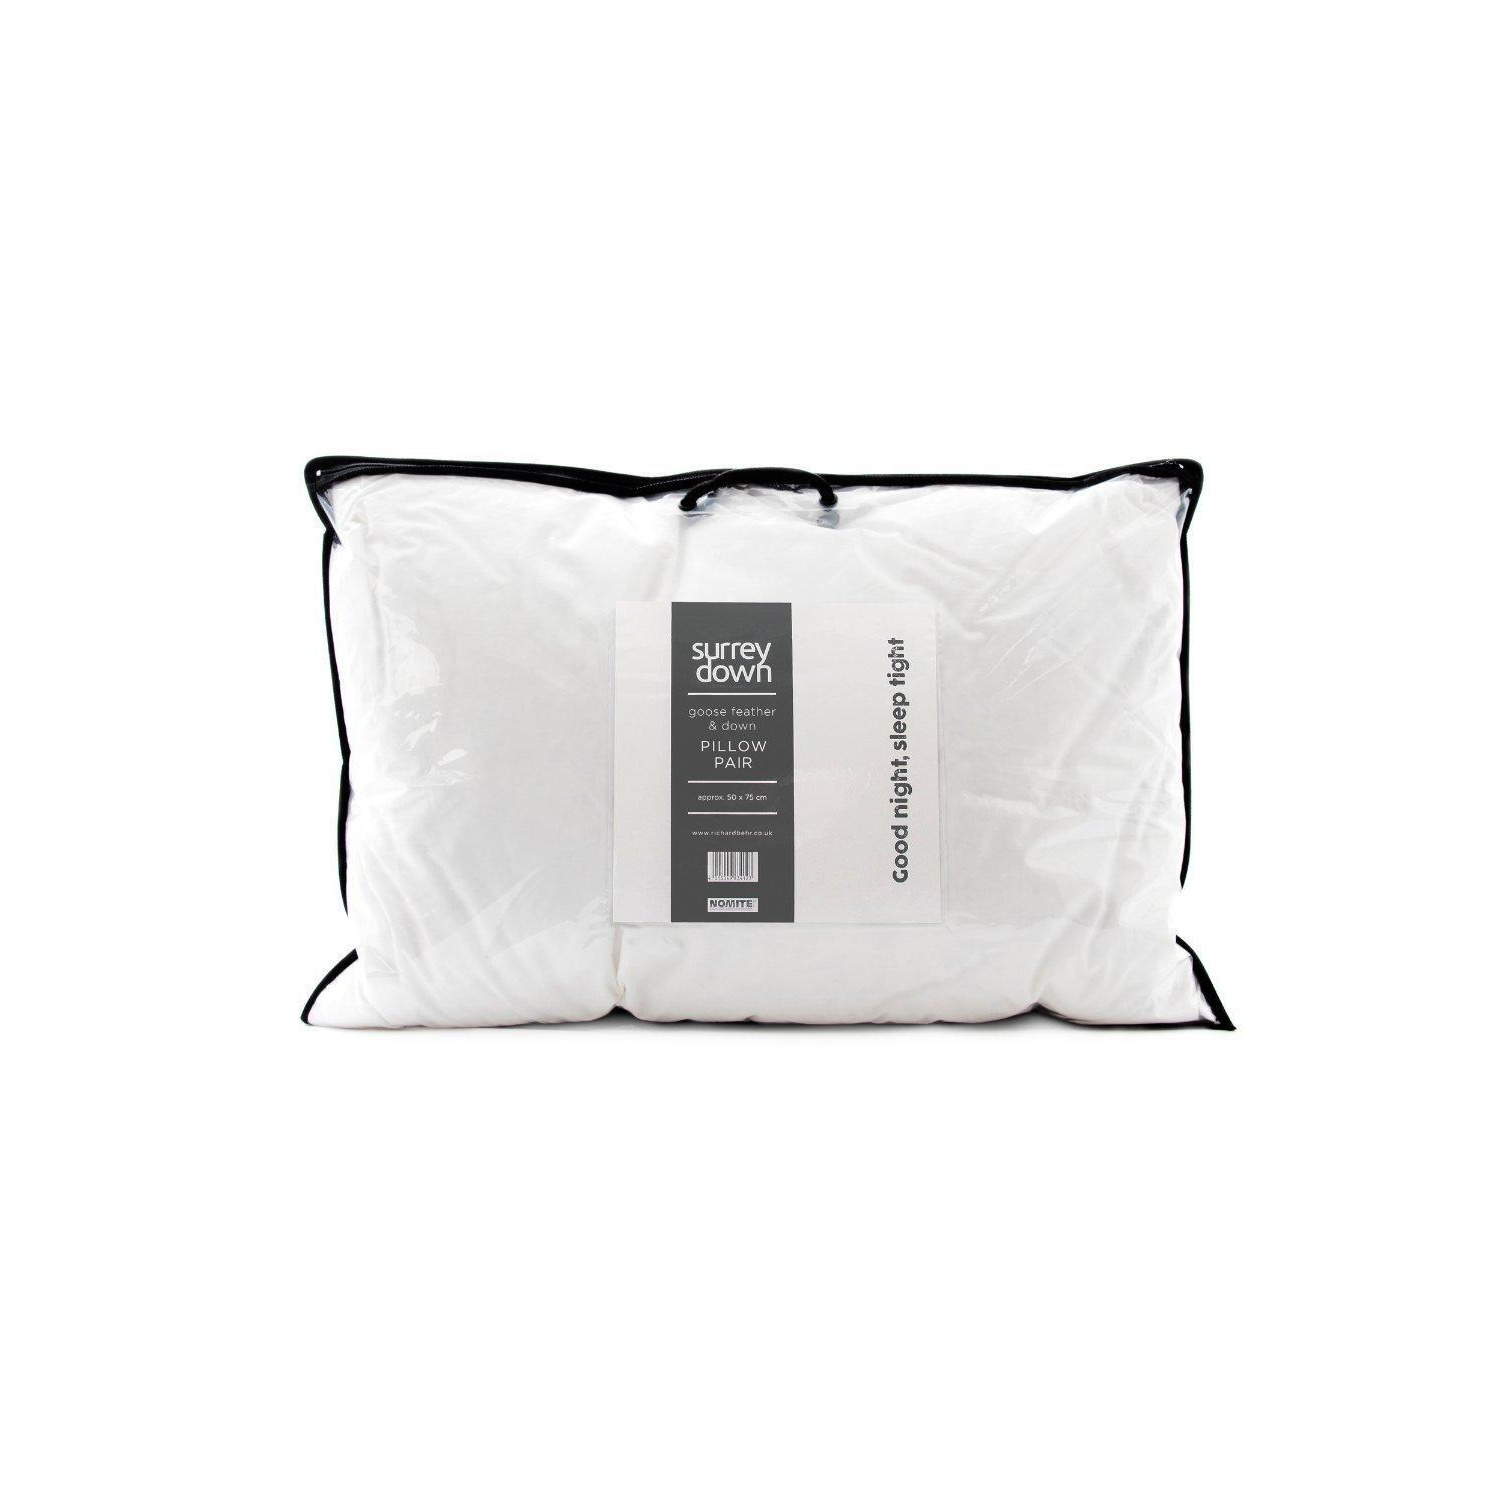 Goose Feather & Down Soft Pillow (2 Pack) - image 1